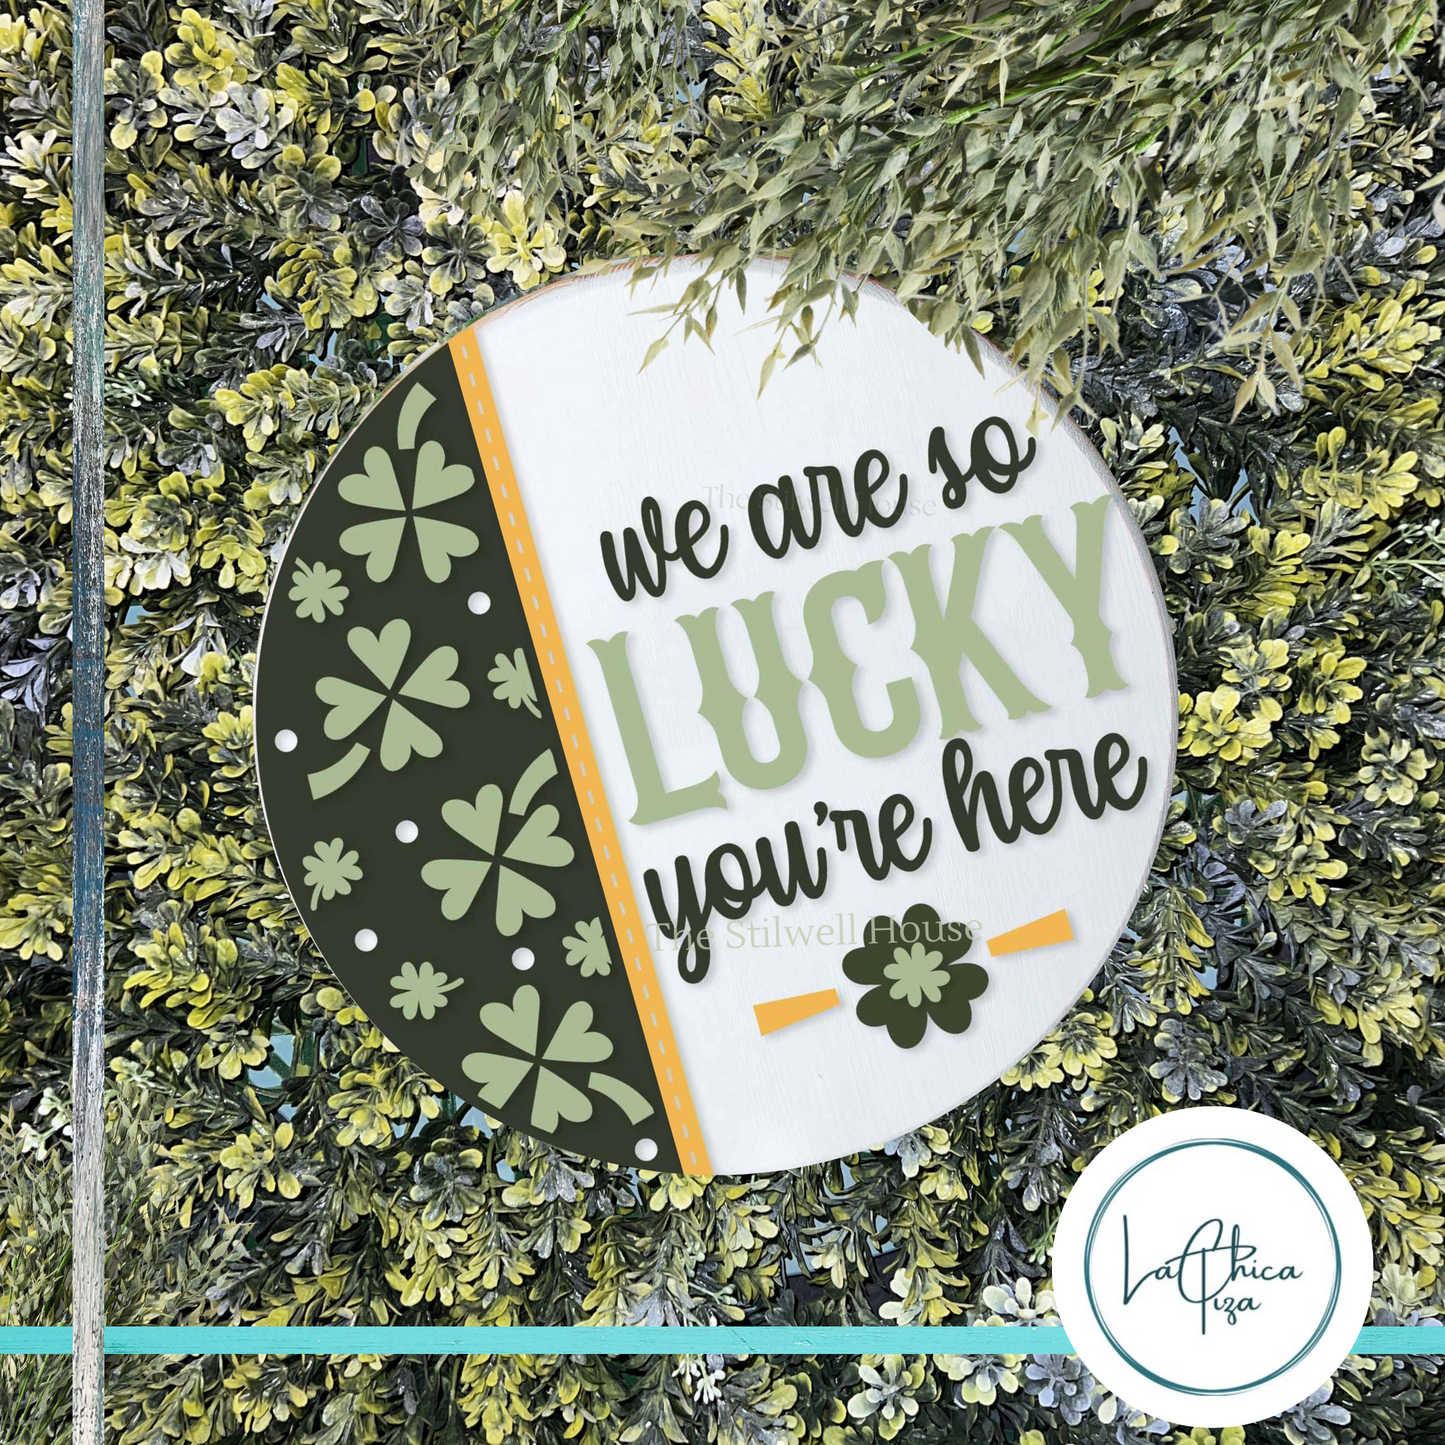 We are so Lucky You’re Here  - Round  Wood Door Sign | Hanger | ChicaTiza